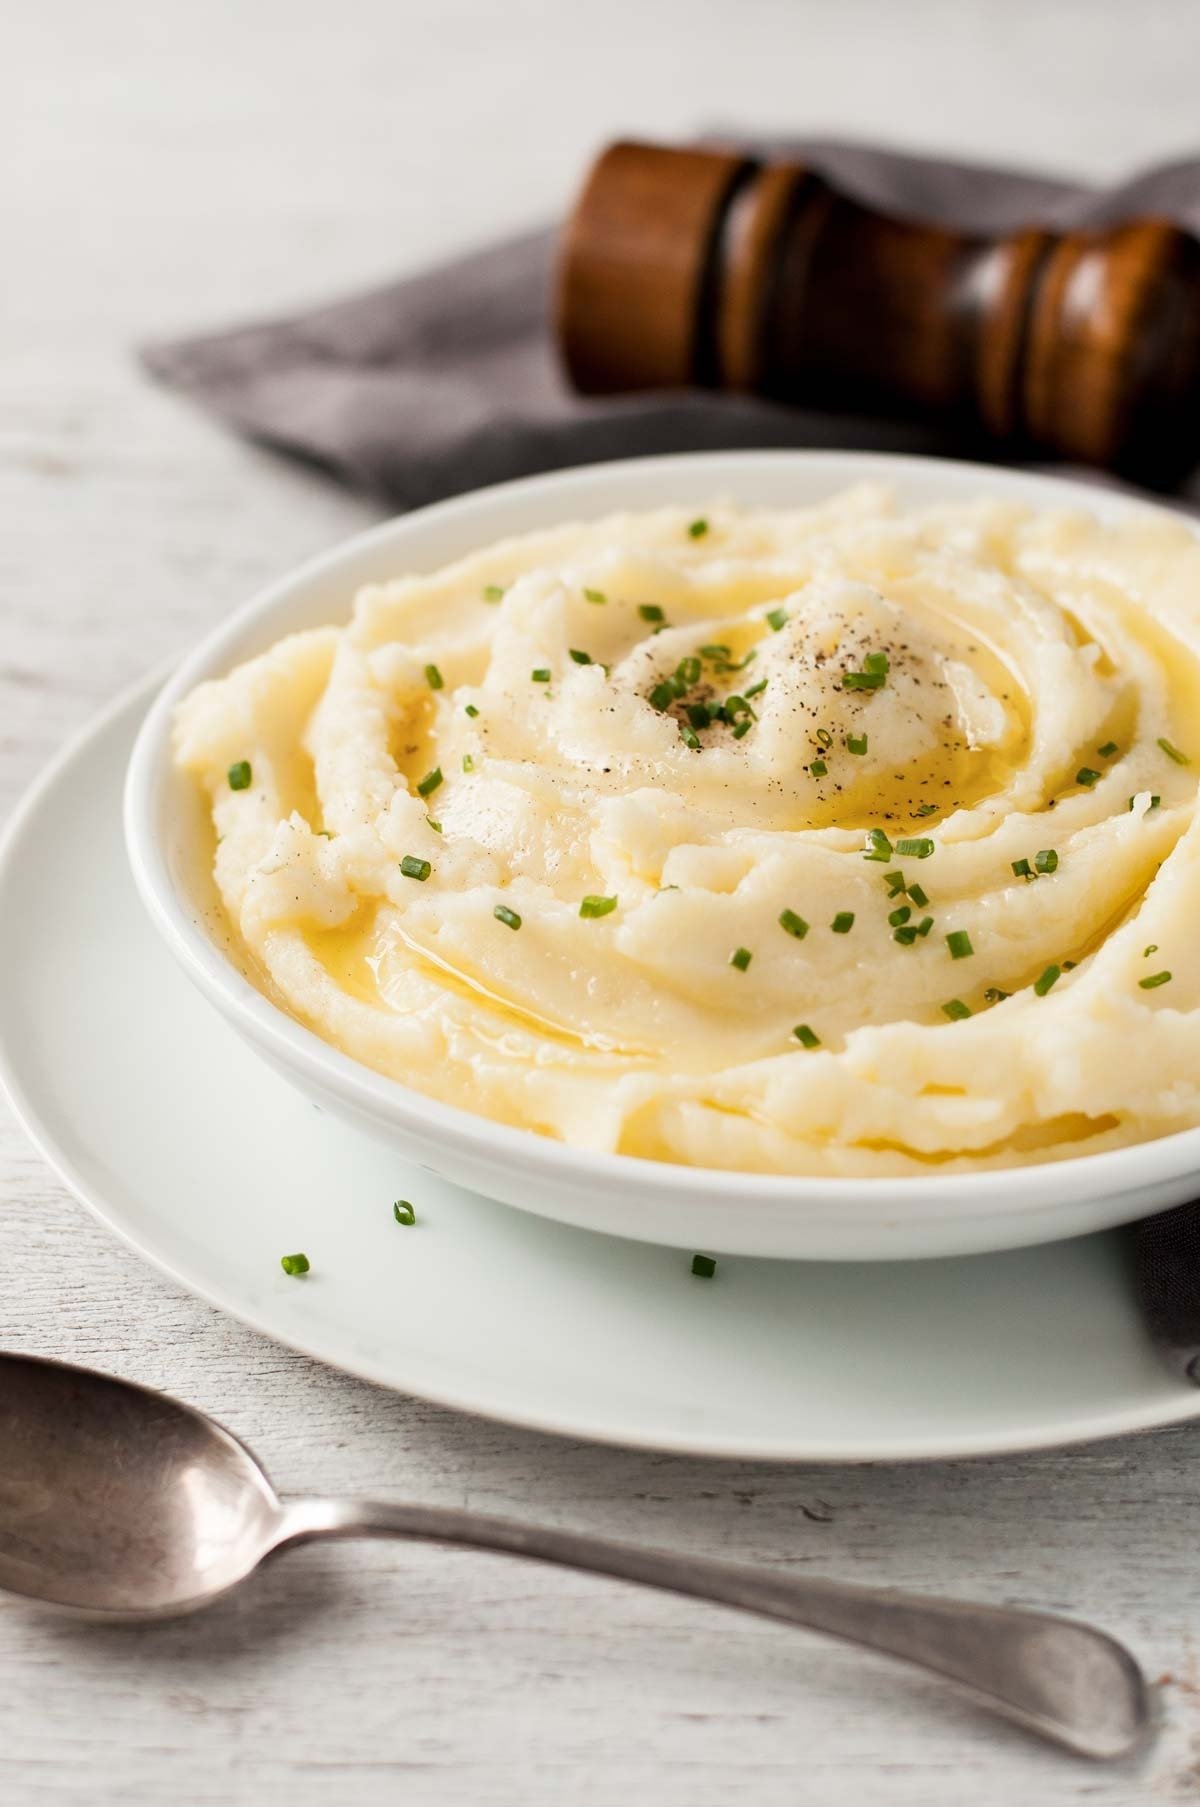 10 Fashionable Dinner Ideas With Mashed Potatoes make ahead mashed potatoes restaurant trick recipetin eats 2023